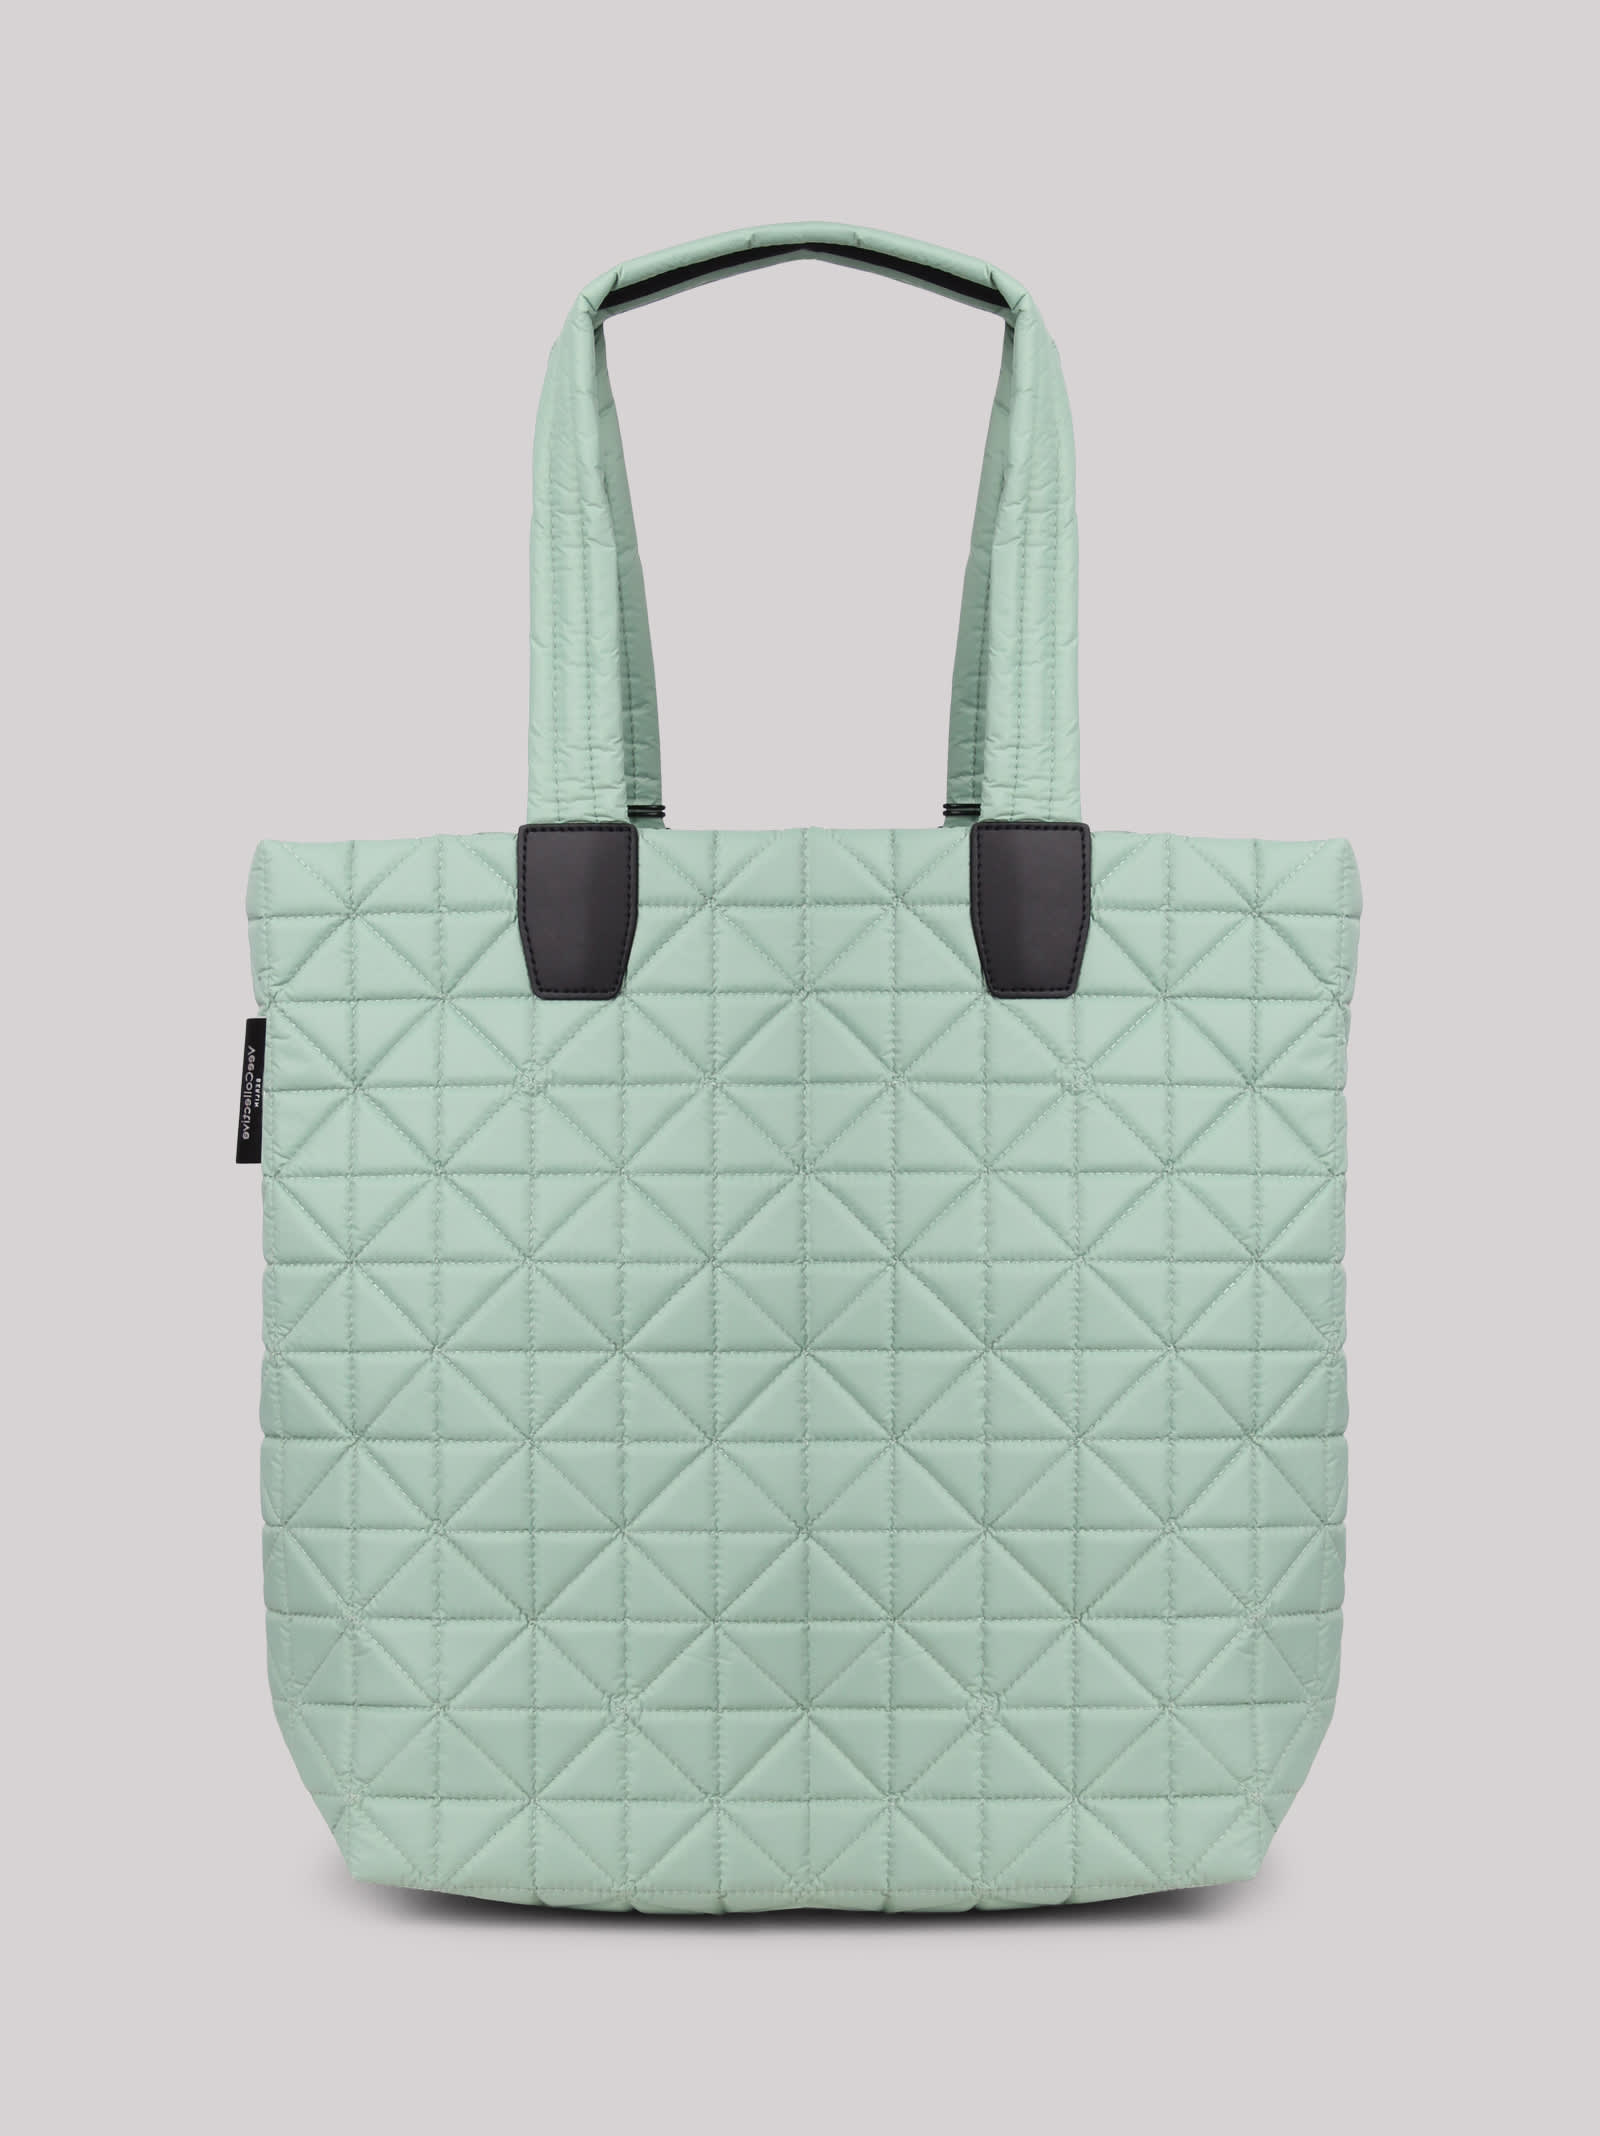 Shop Veecollective Vee Collective Large Vee Geometric Tote Bag